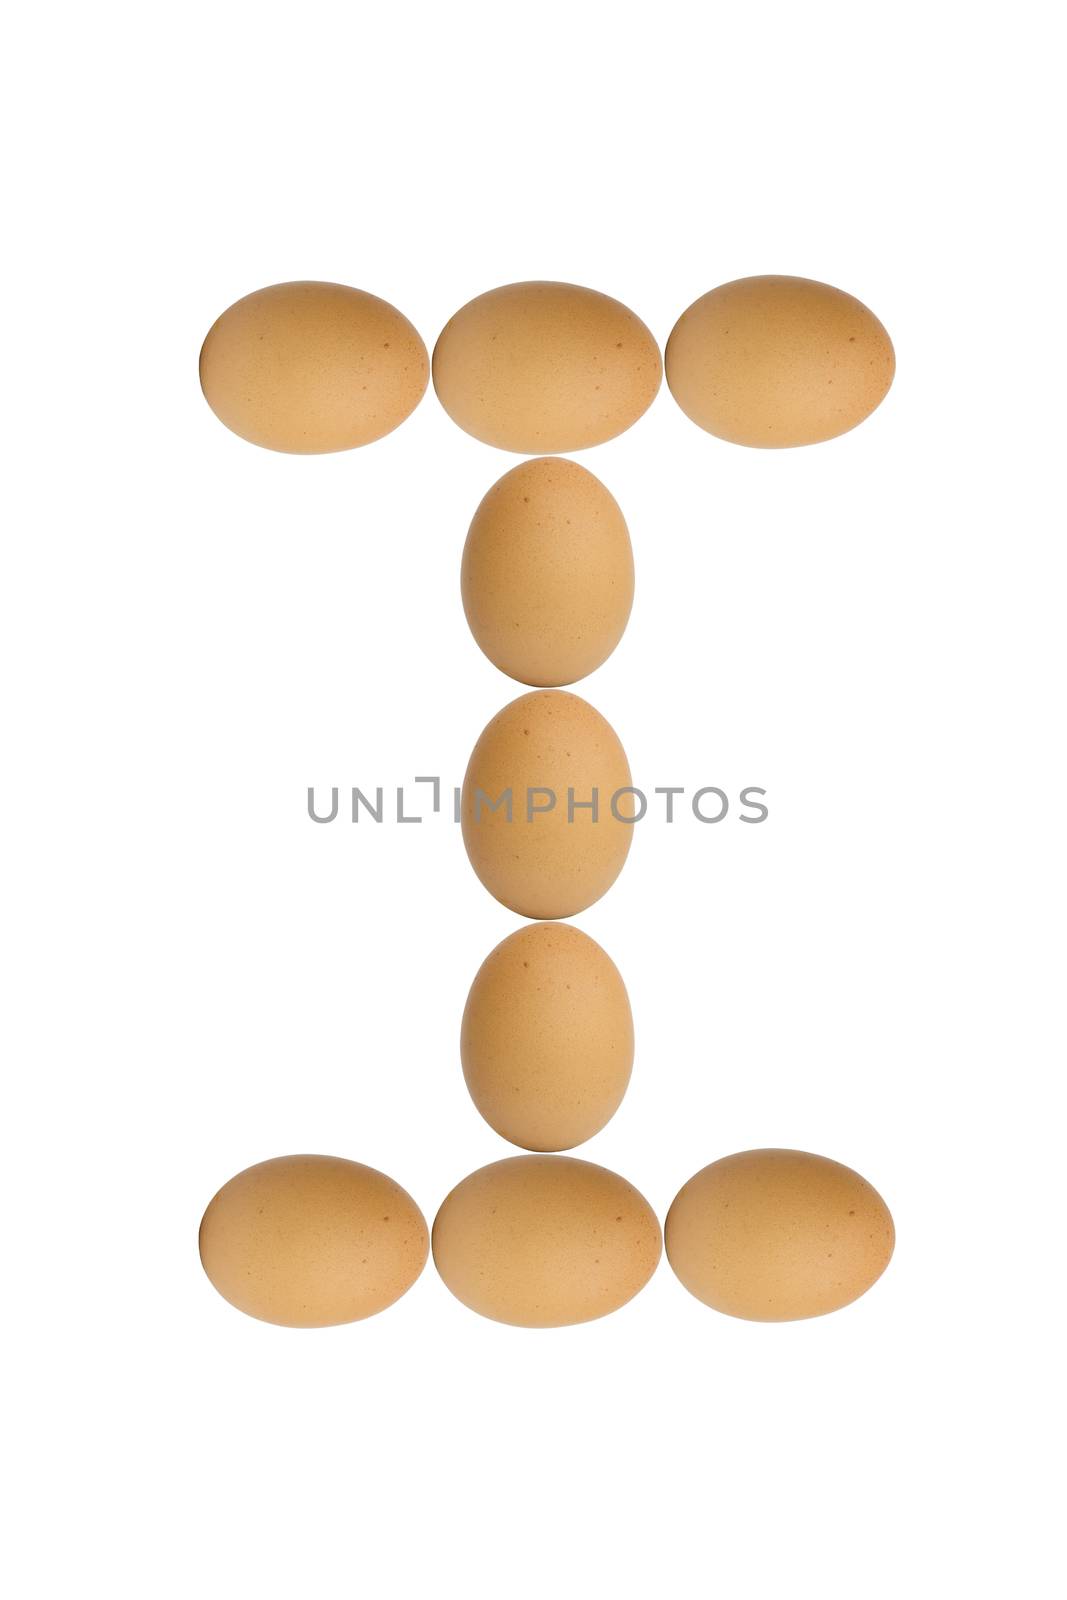 Alphabets  A to Z from brown eggs alphabet isolated on white background, I